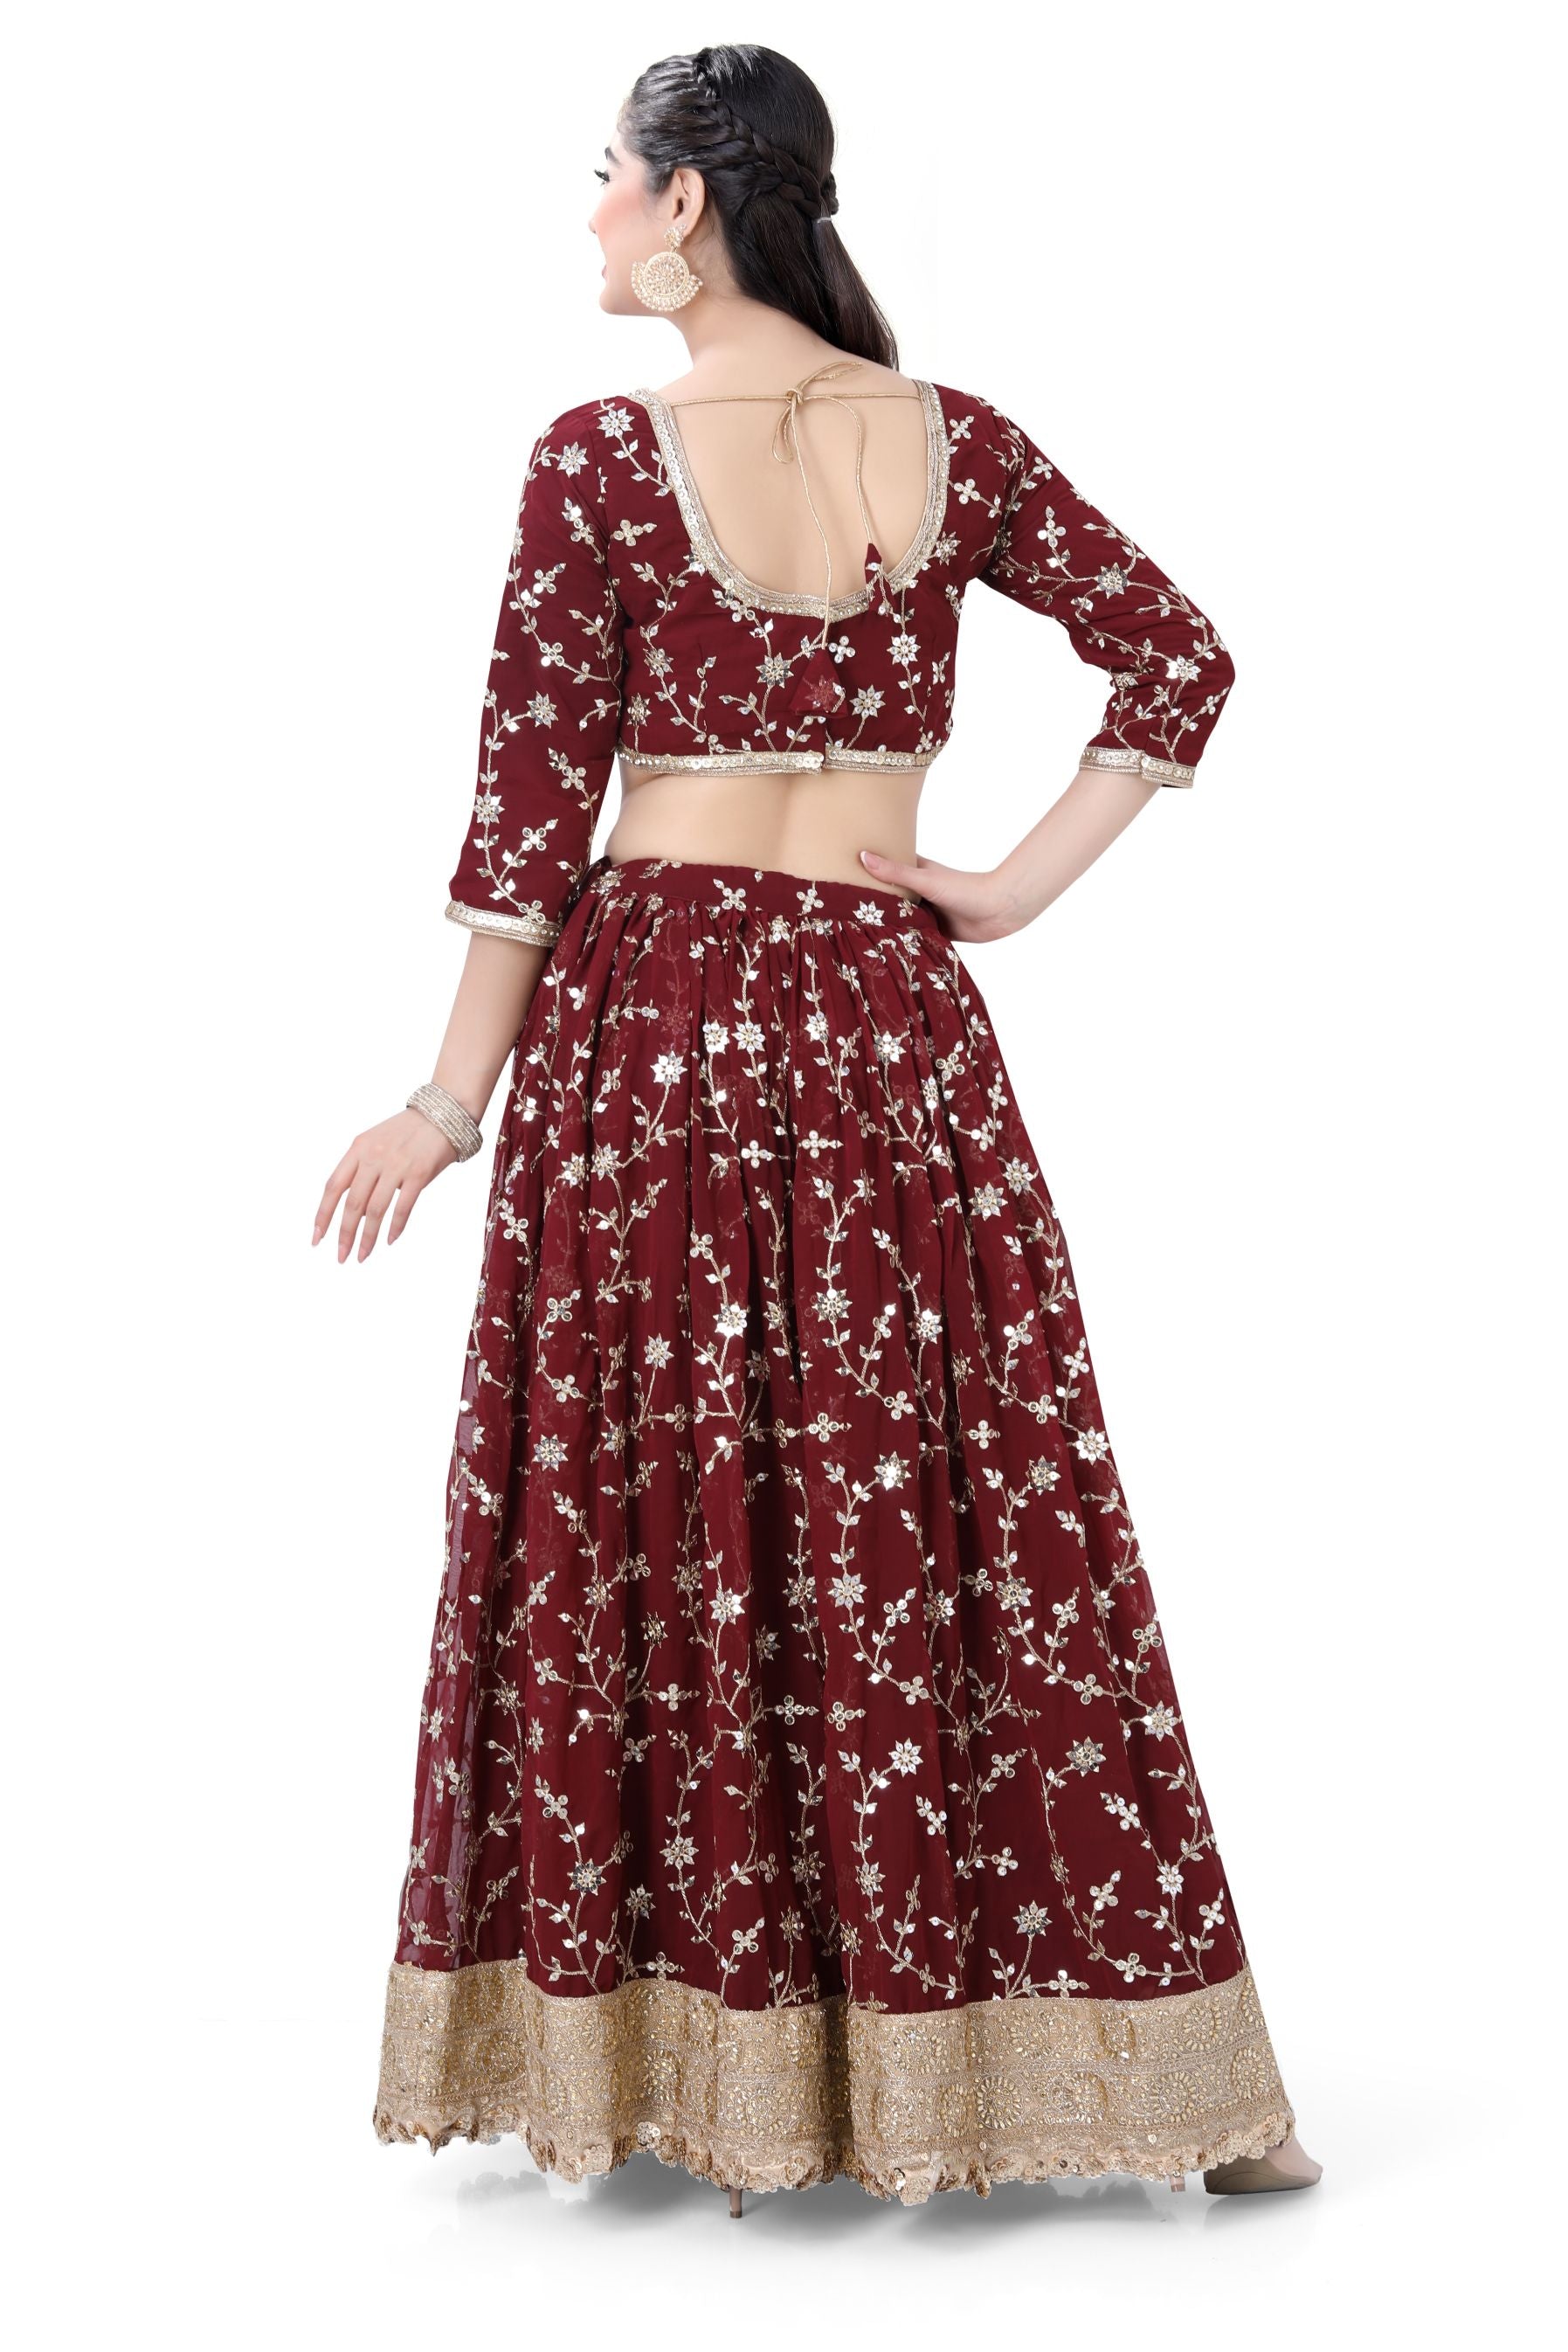 Maroon Embroidered Lehenga Choli - Premium Partywear Lehenga from Dulhan Exclusives - Just $385! Shop now at Dulhan Exclusives